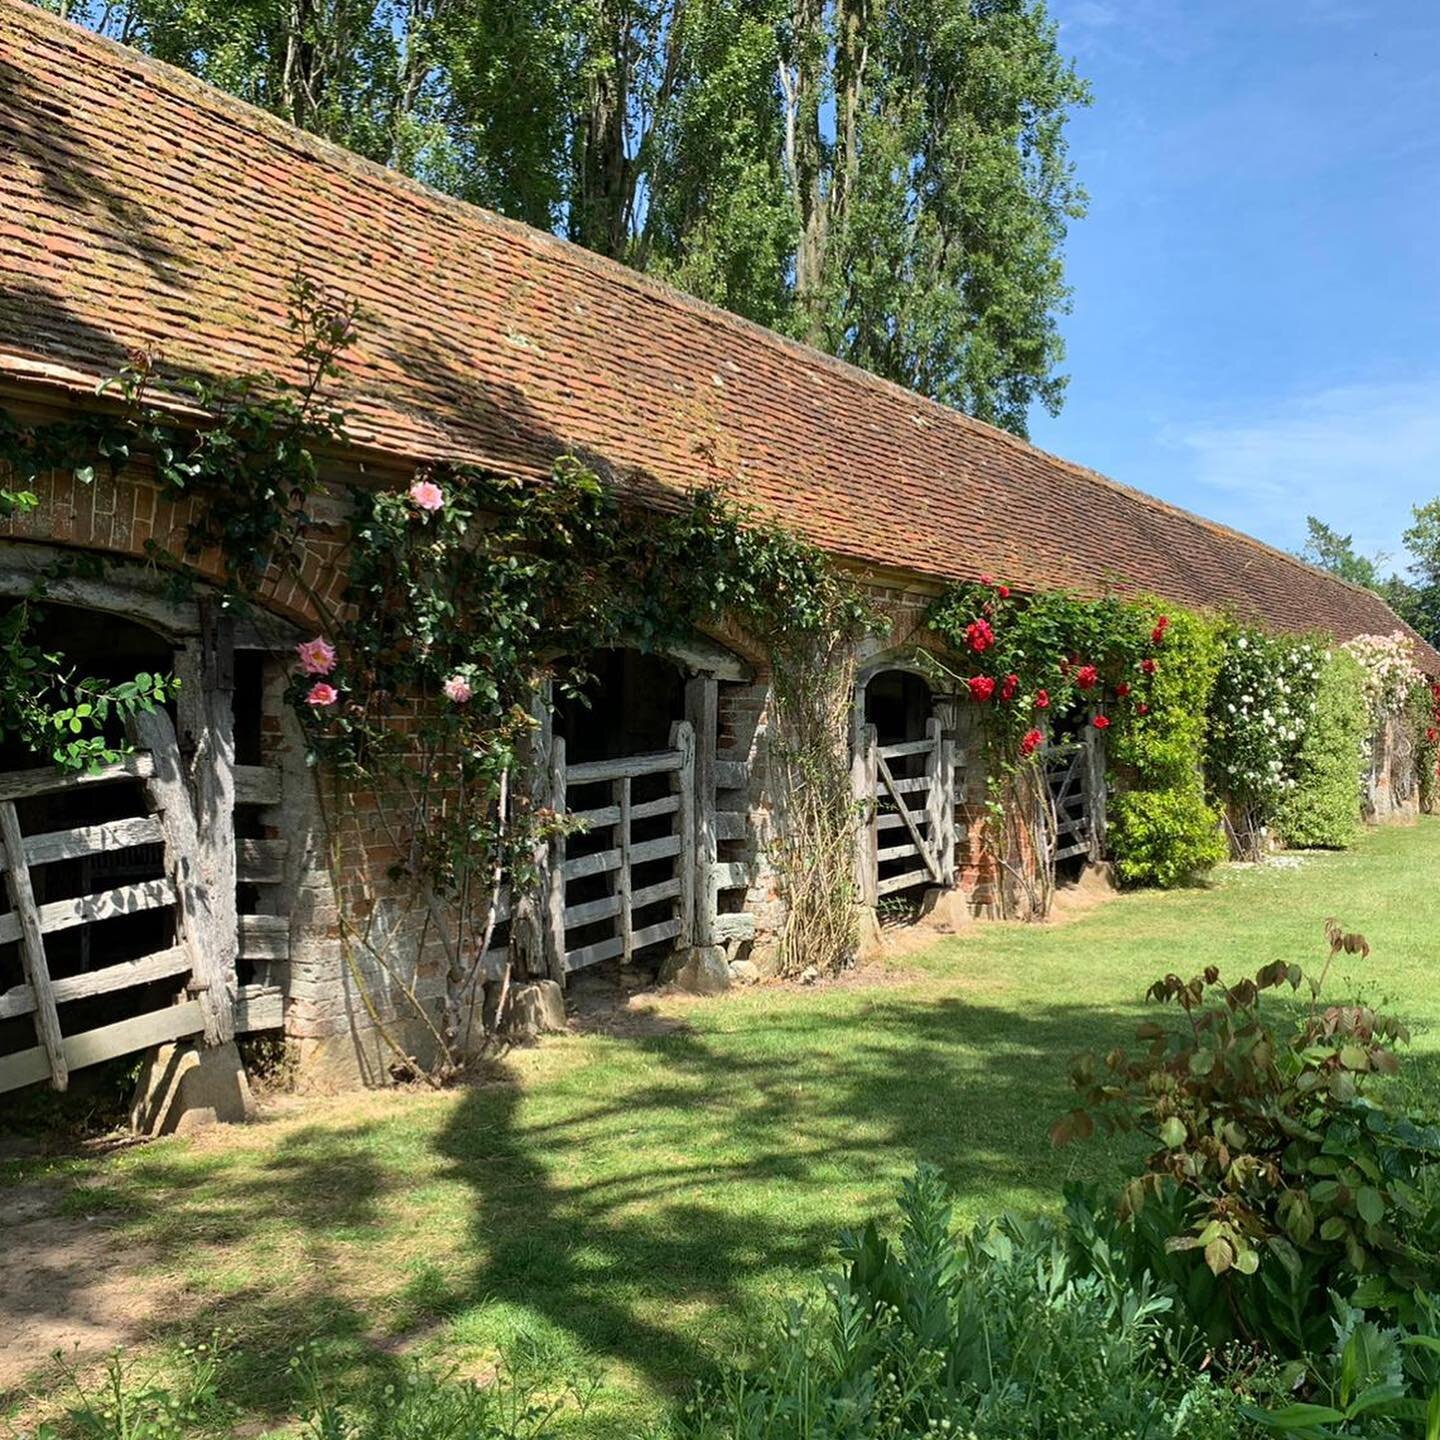 Saskia here 🙋🏻&zwj;♀️- With holidaying in the UK being the norm this year, in July I ventured to the inspiring Barrington Court Gardens in Somerset as part of a West Country break. The gardens, in part designed by Gertrude Jekyll were a stunning ex